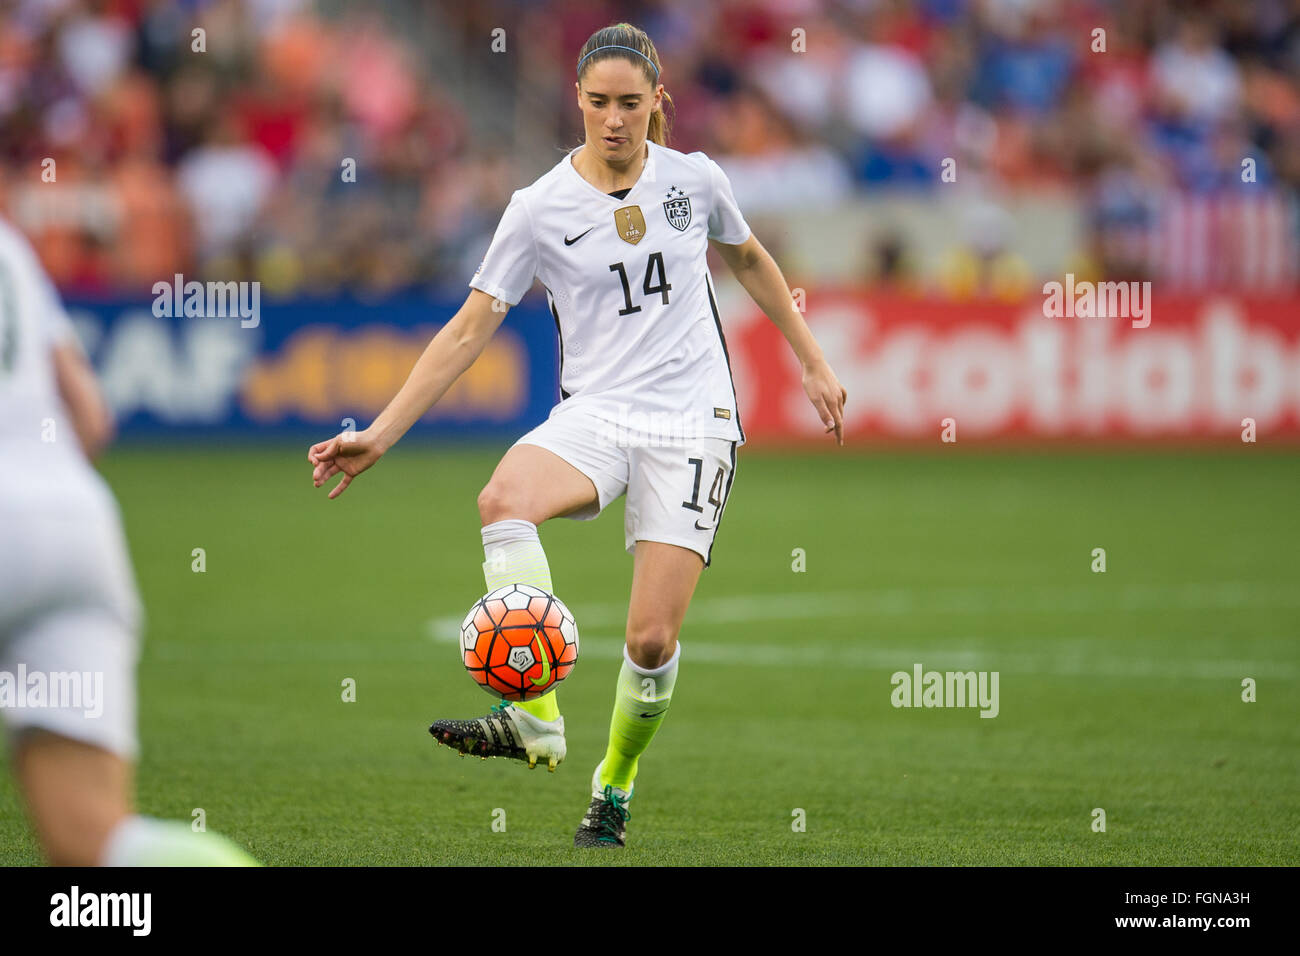 Houston, TX, USA. 21st Feb, 2016. United States midfielder Morgan Brian (14) controls the ball during the Final match of the CONCACAF Olympic Qualifying tournament between Canada and the USA at BBVA Compass Stadium in Houston, TX. USA won 2-0.Trask Smith/CSM/Alamy Live News Stock Photo